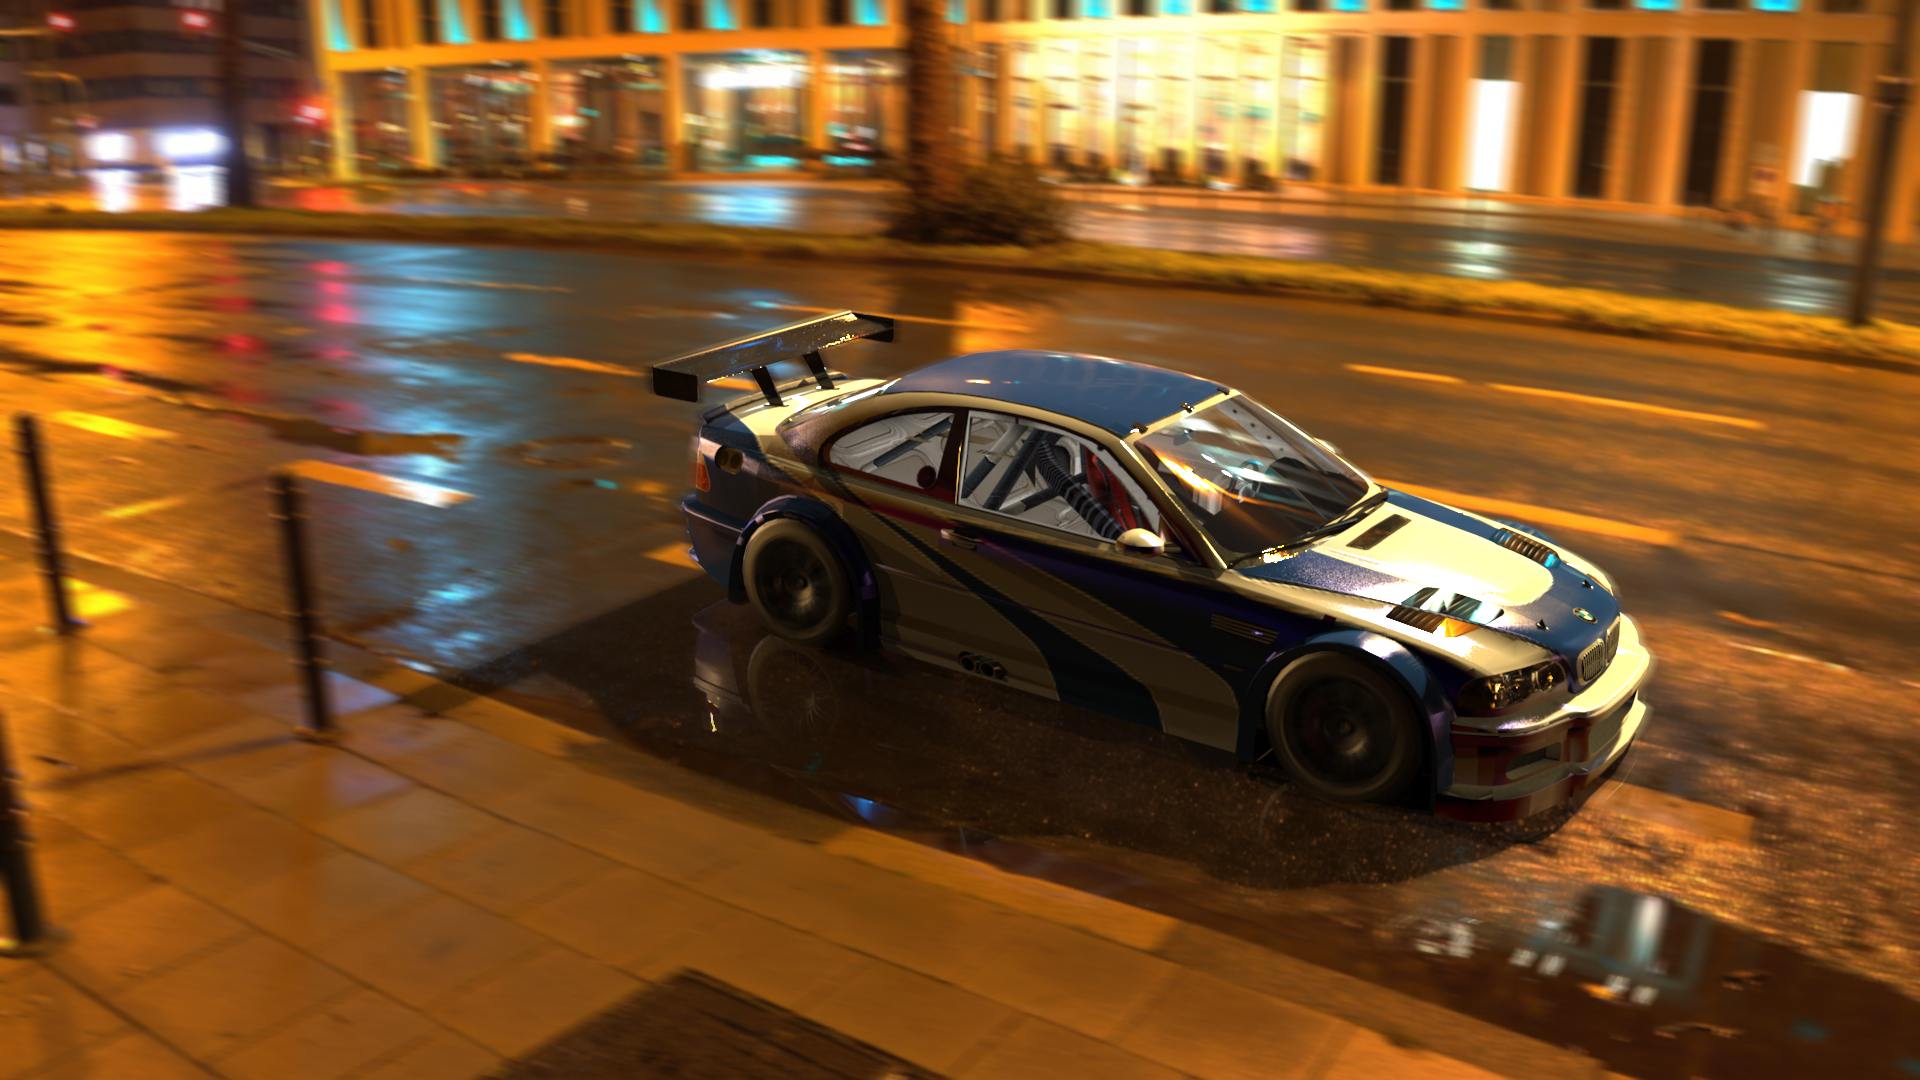 General 1920x1080 BMW M3 GTR Need for Speed: Most Wanted video game art car BMW E46 BMW 3 Series high angle